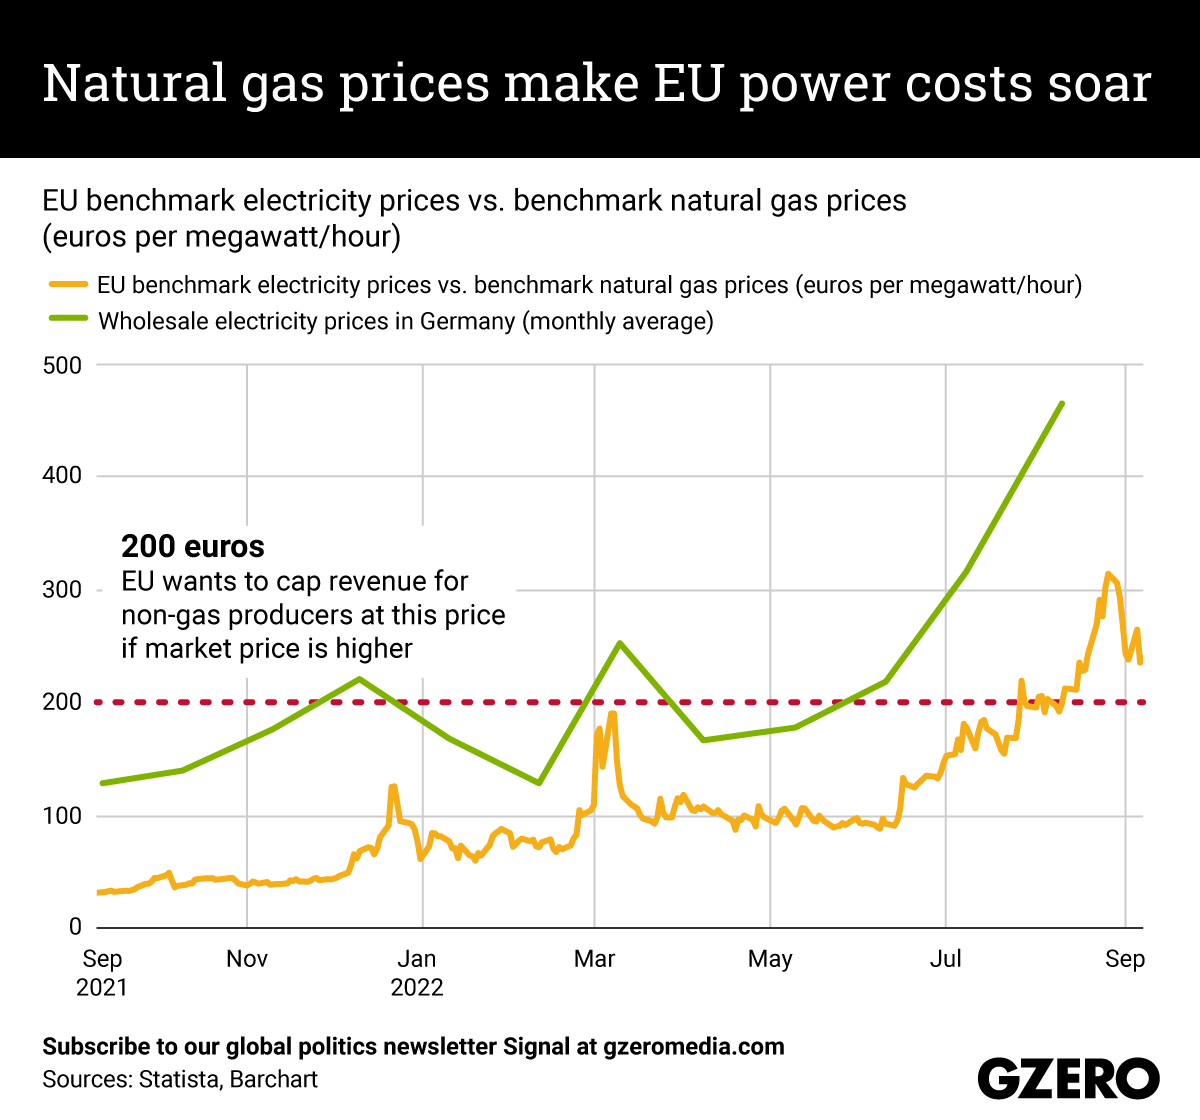 The Graphic Truth: Natural gas prices make EU power costs soar